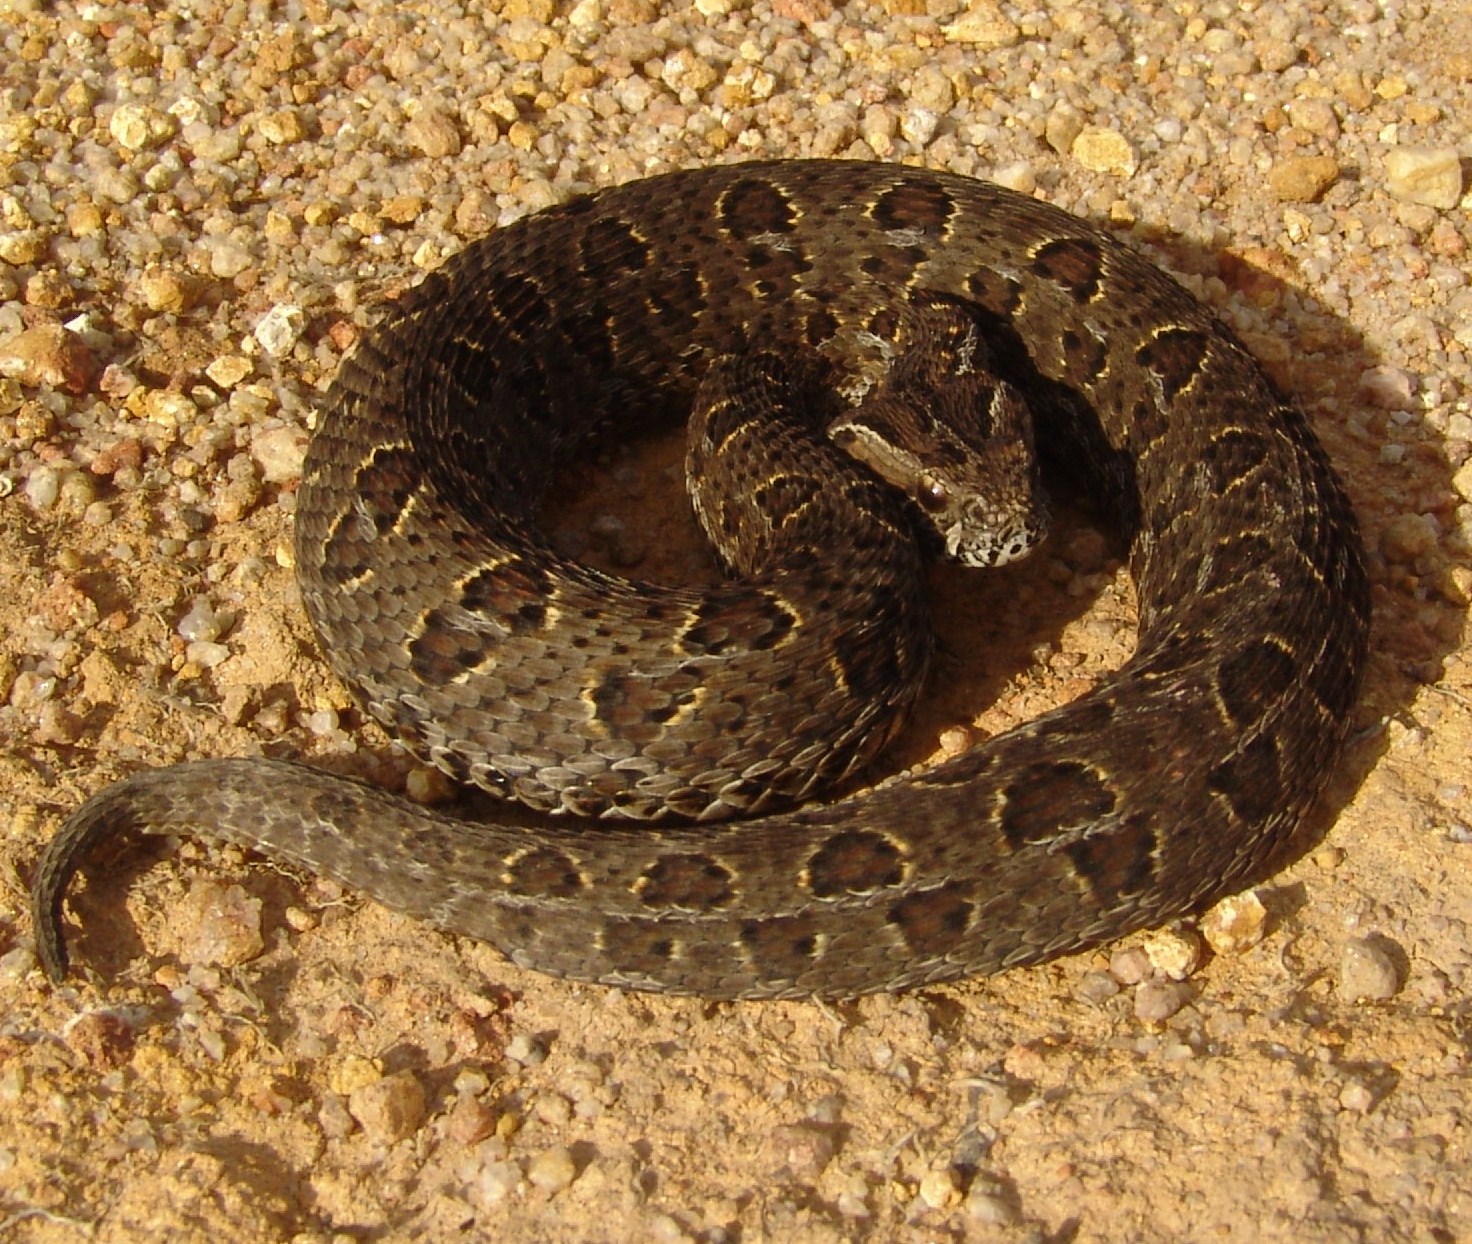 Puff Adder Snake Pictures